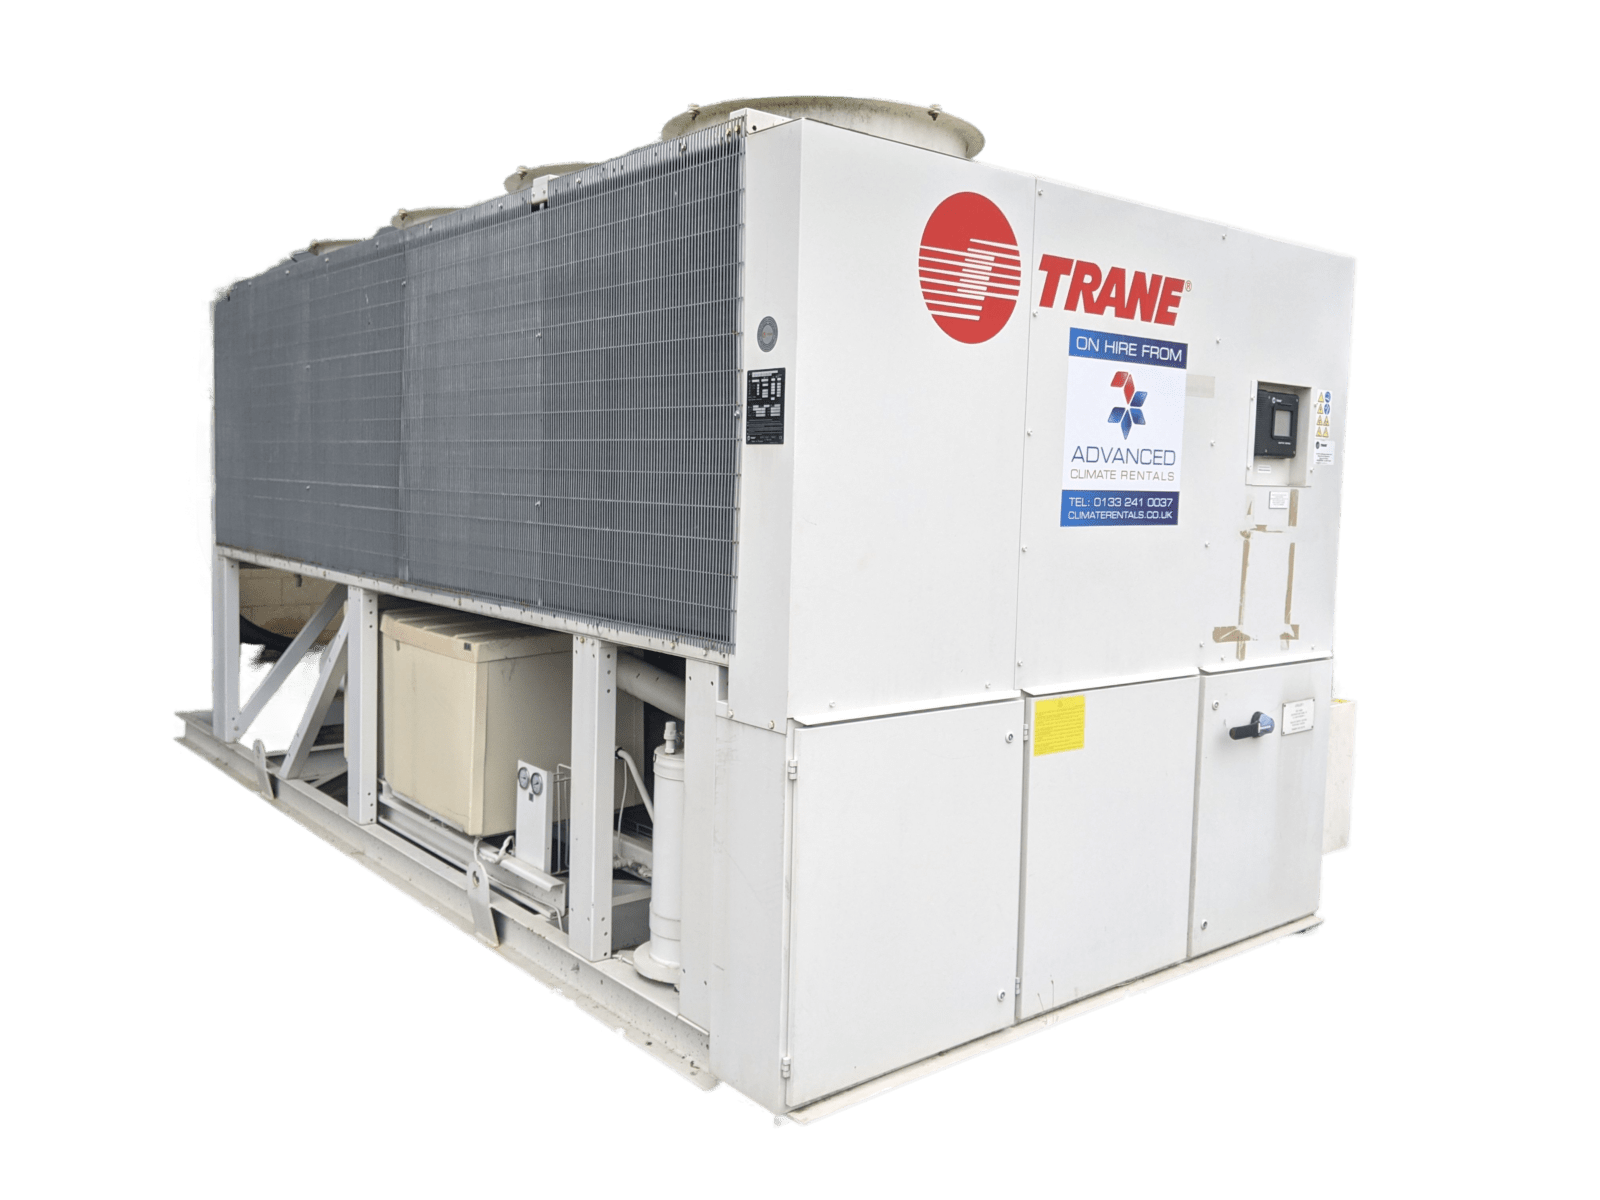 Portable trane chillers for hire- can be sent to any site